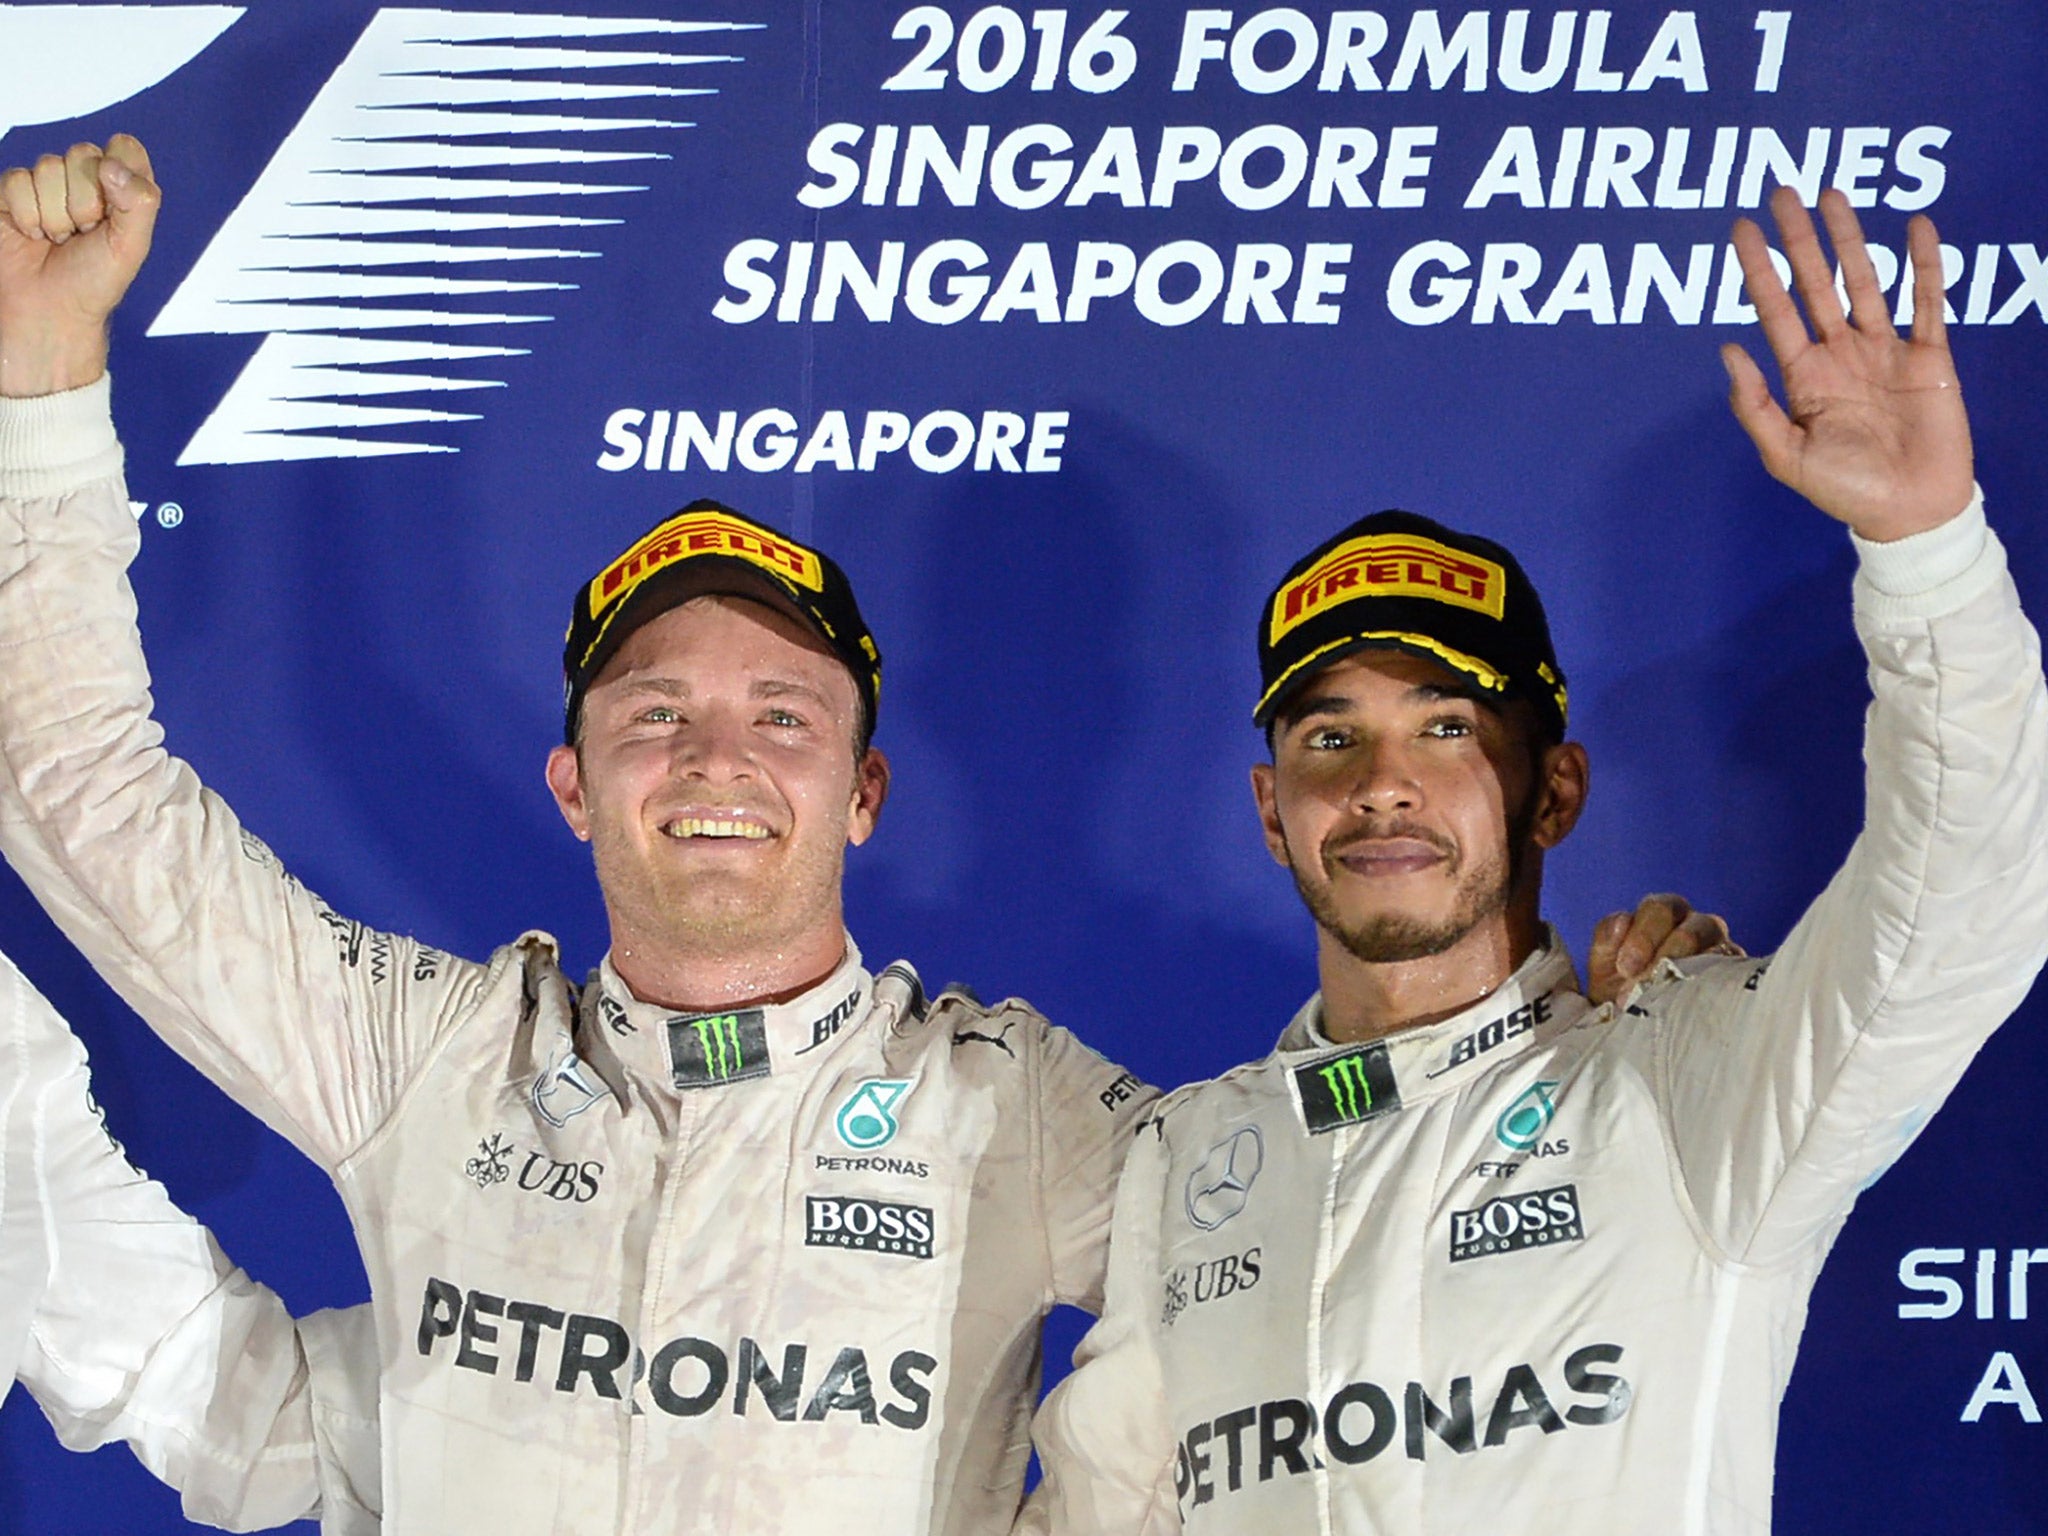 Nico Rosberg and Lewis Hamilton wave to the crowd on the podium in Singapore